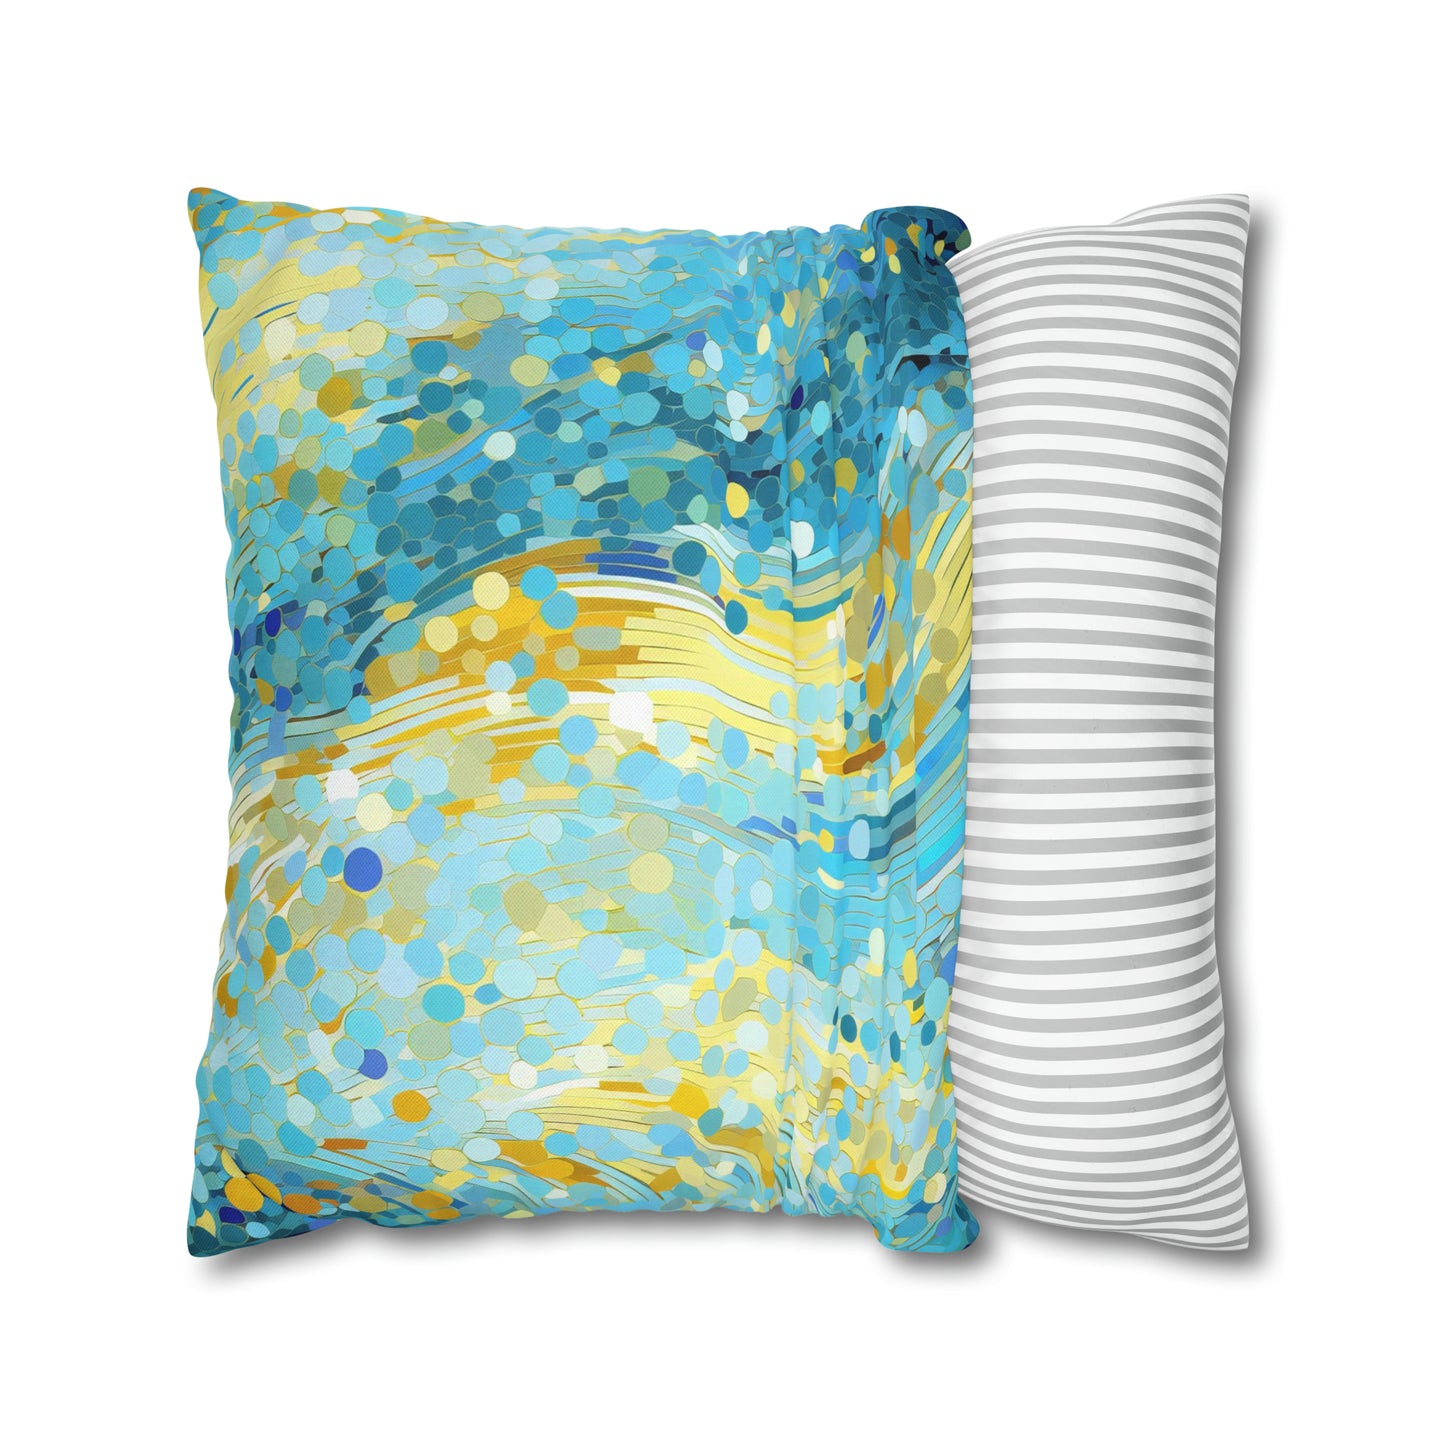 River of Gold Mosaic Square Pillow Case